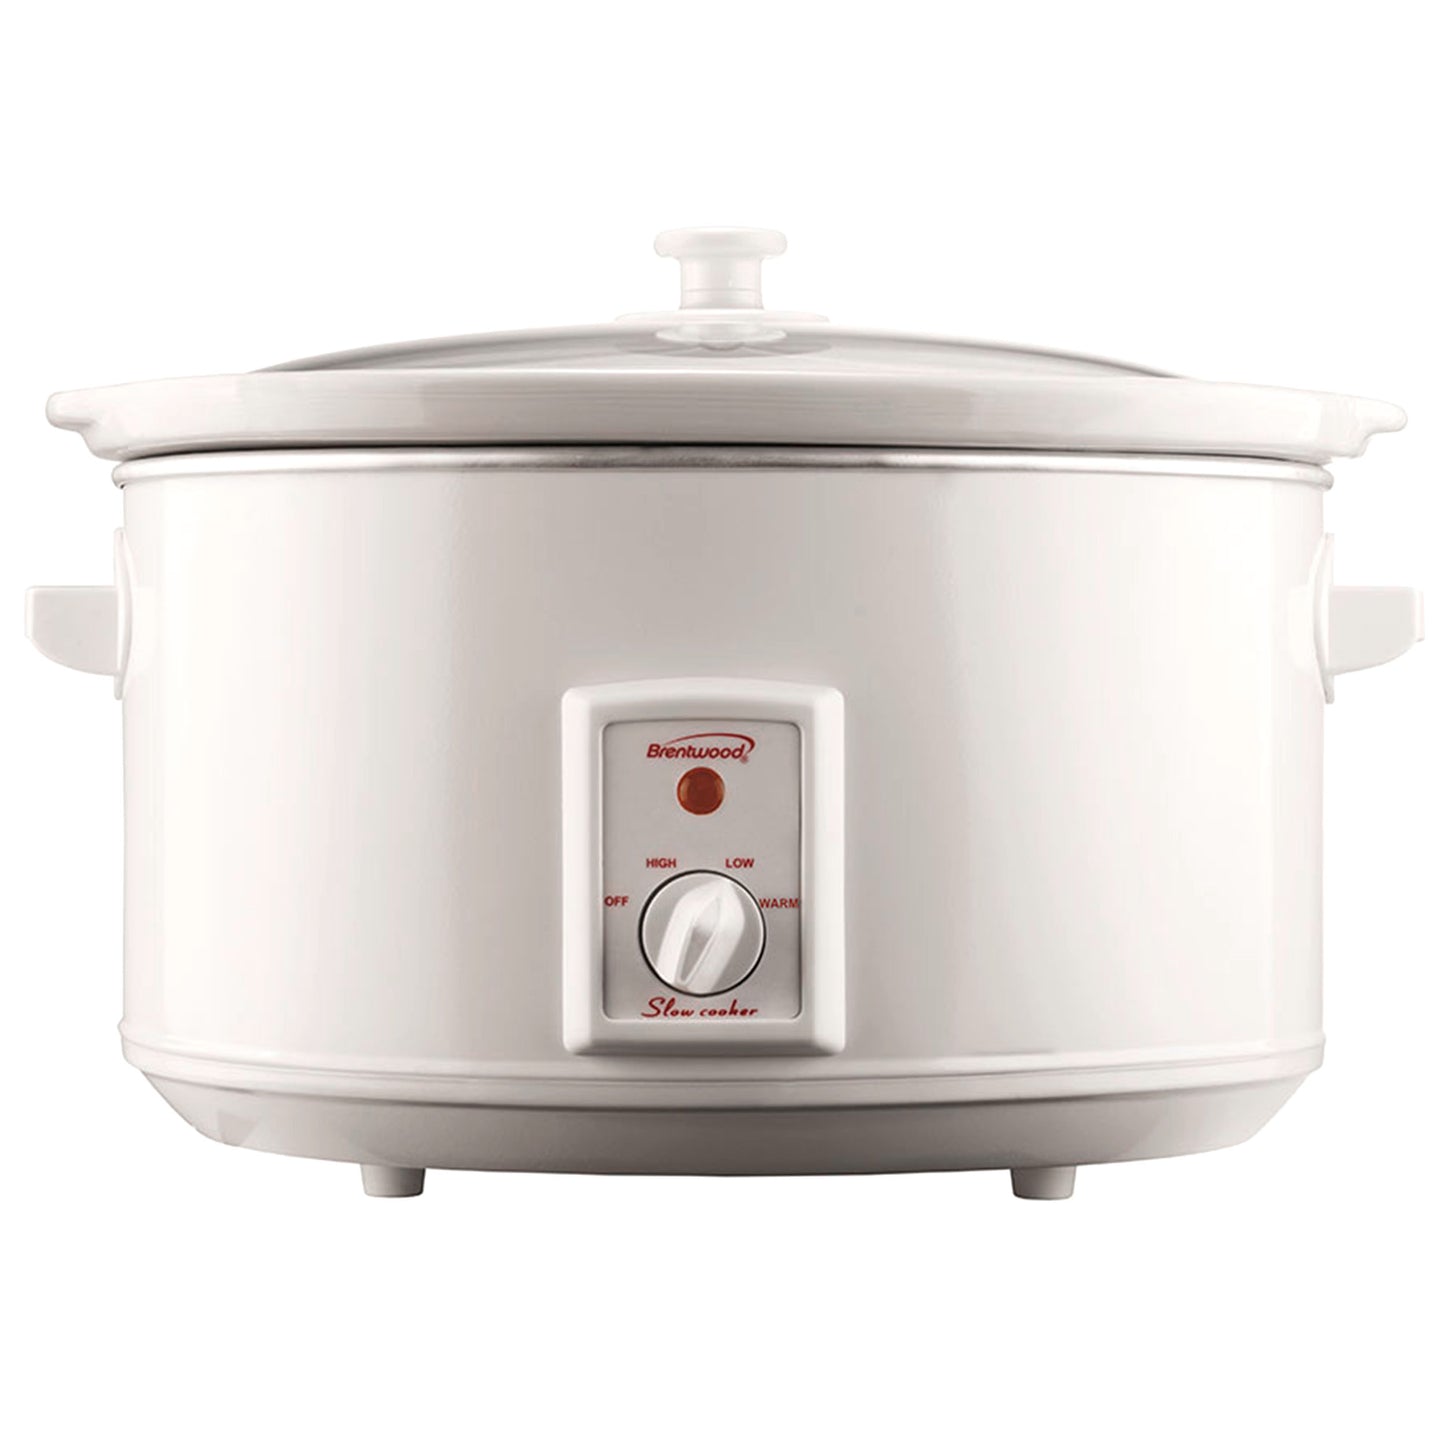 BRENTWOOD Brentwood 8.0 Quart Slow Cooker in White